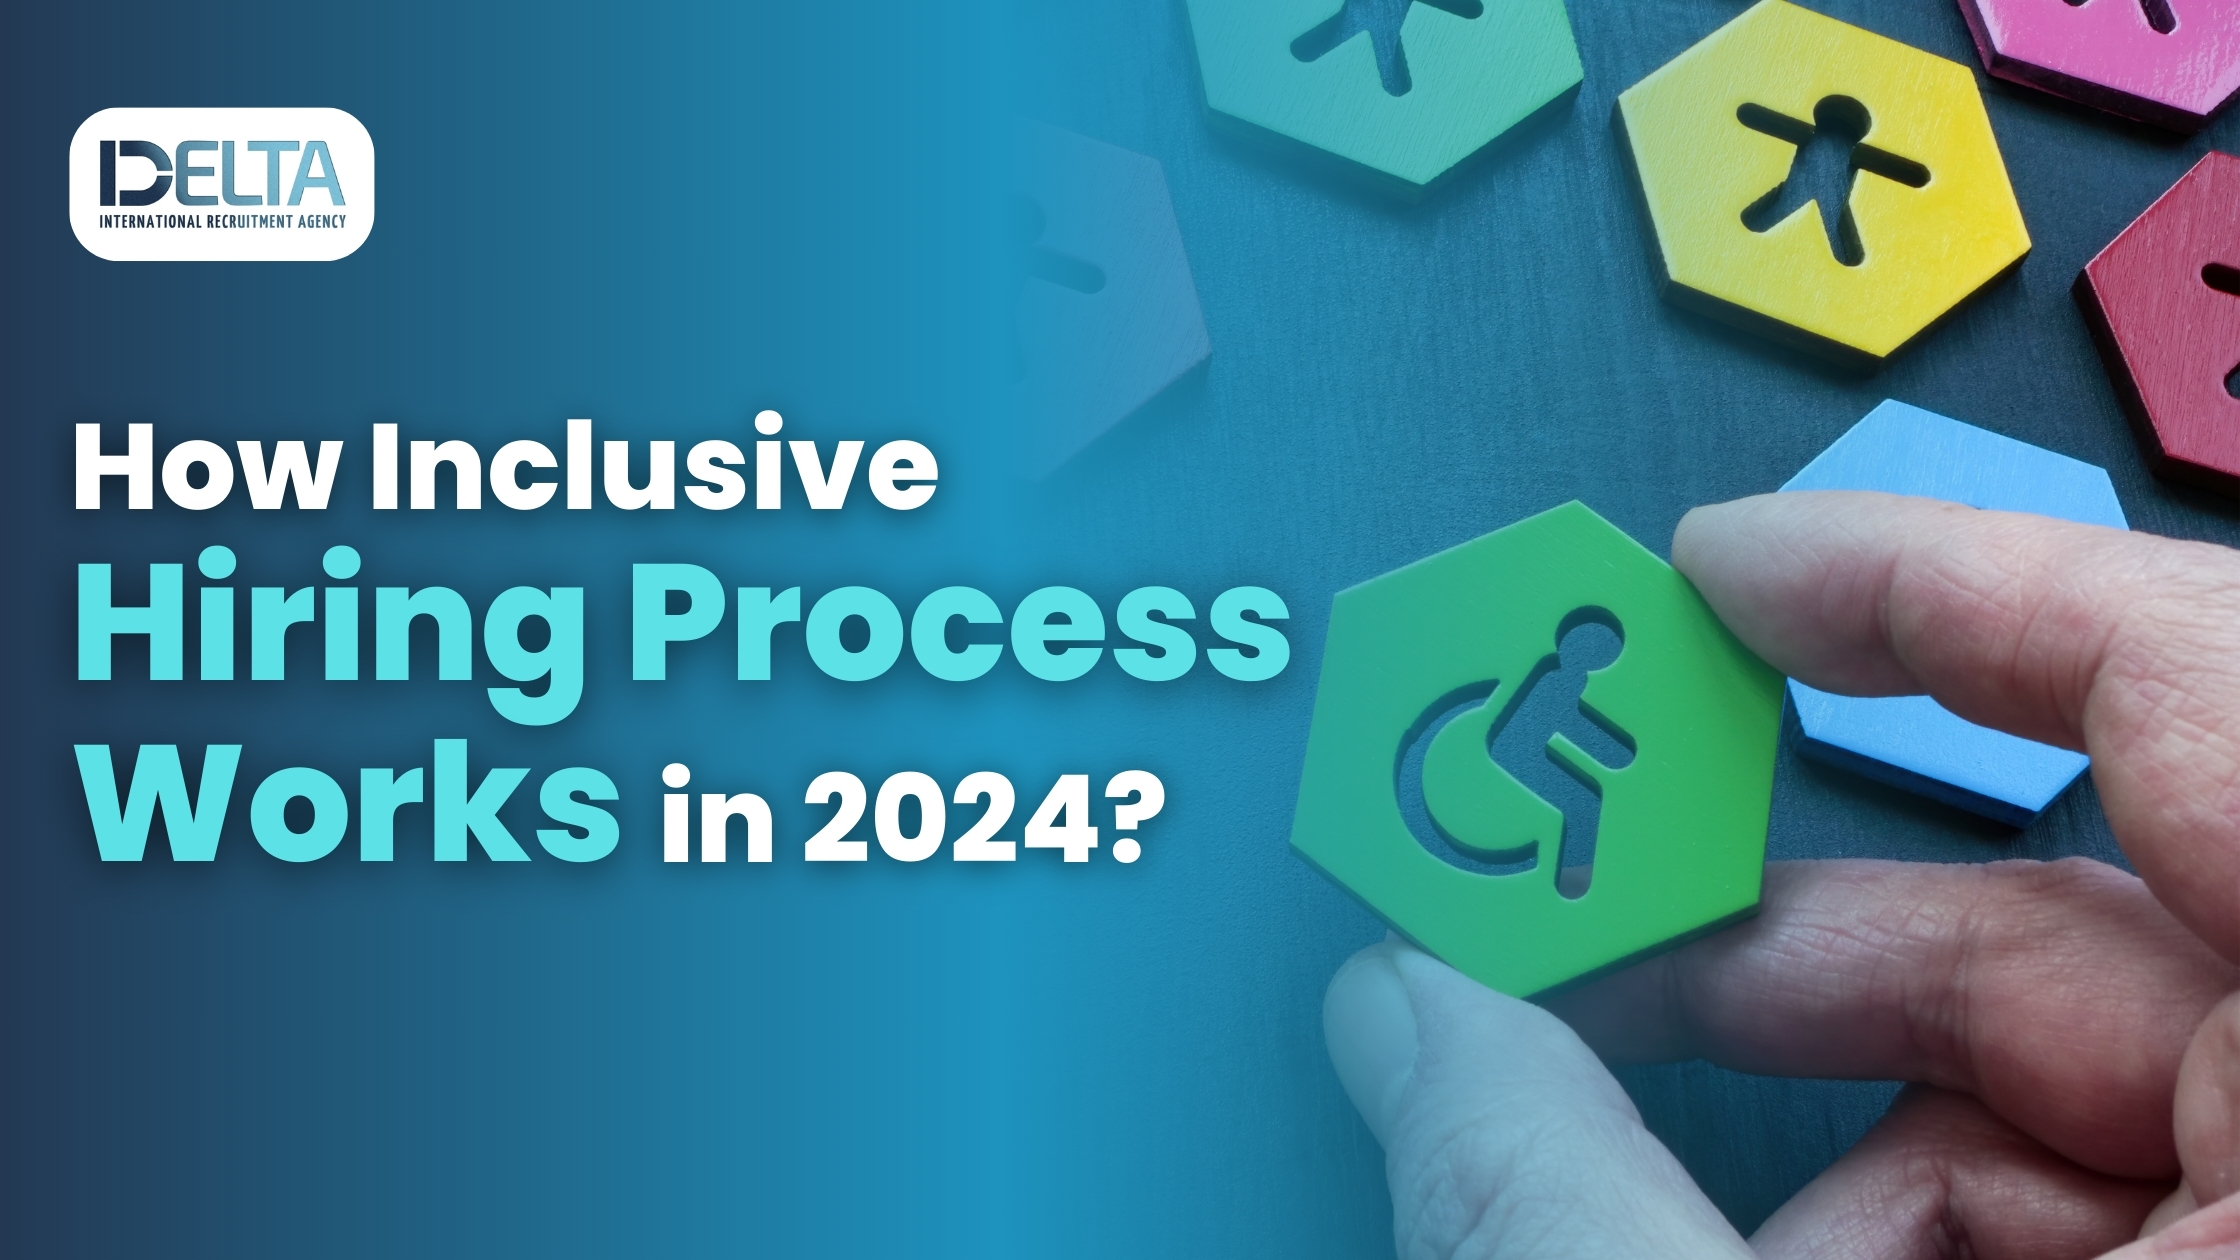 How Inclusive Hiring Process Works in 2024?